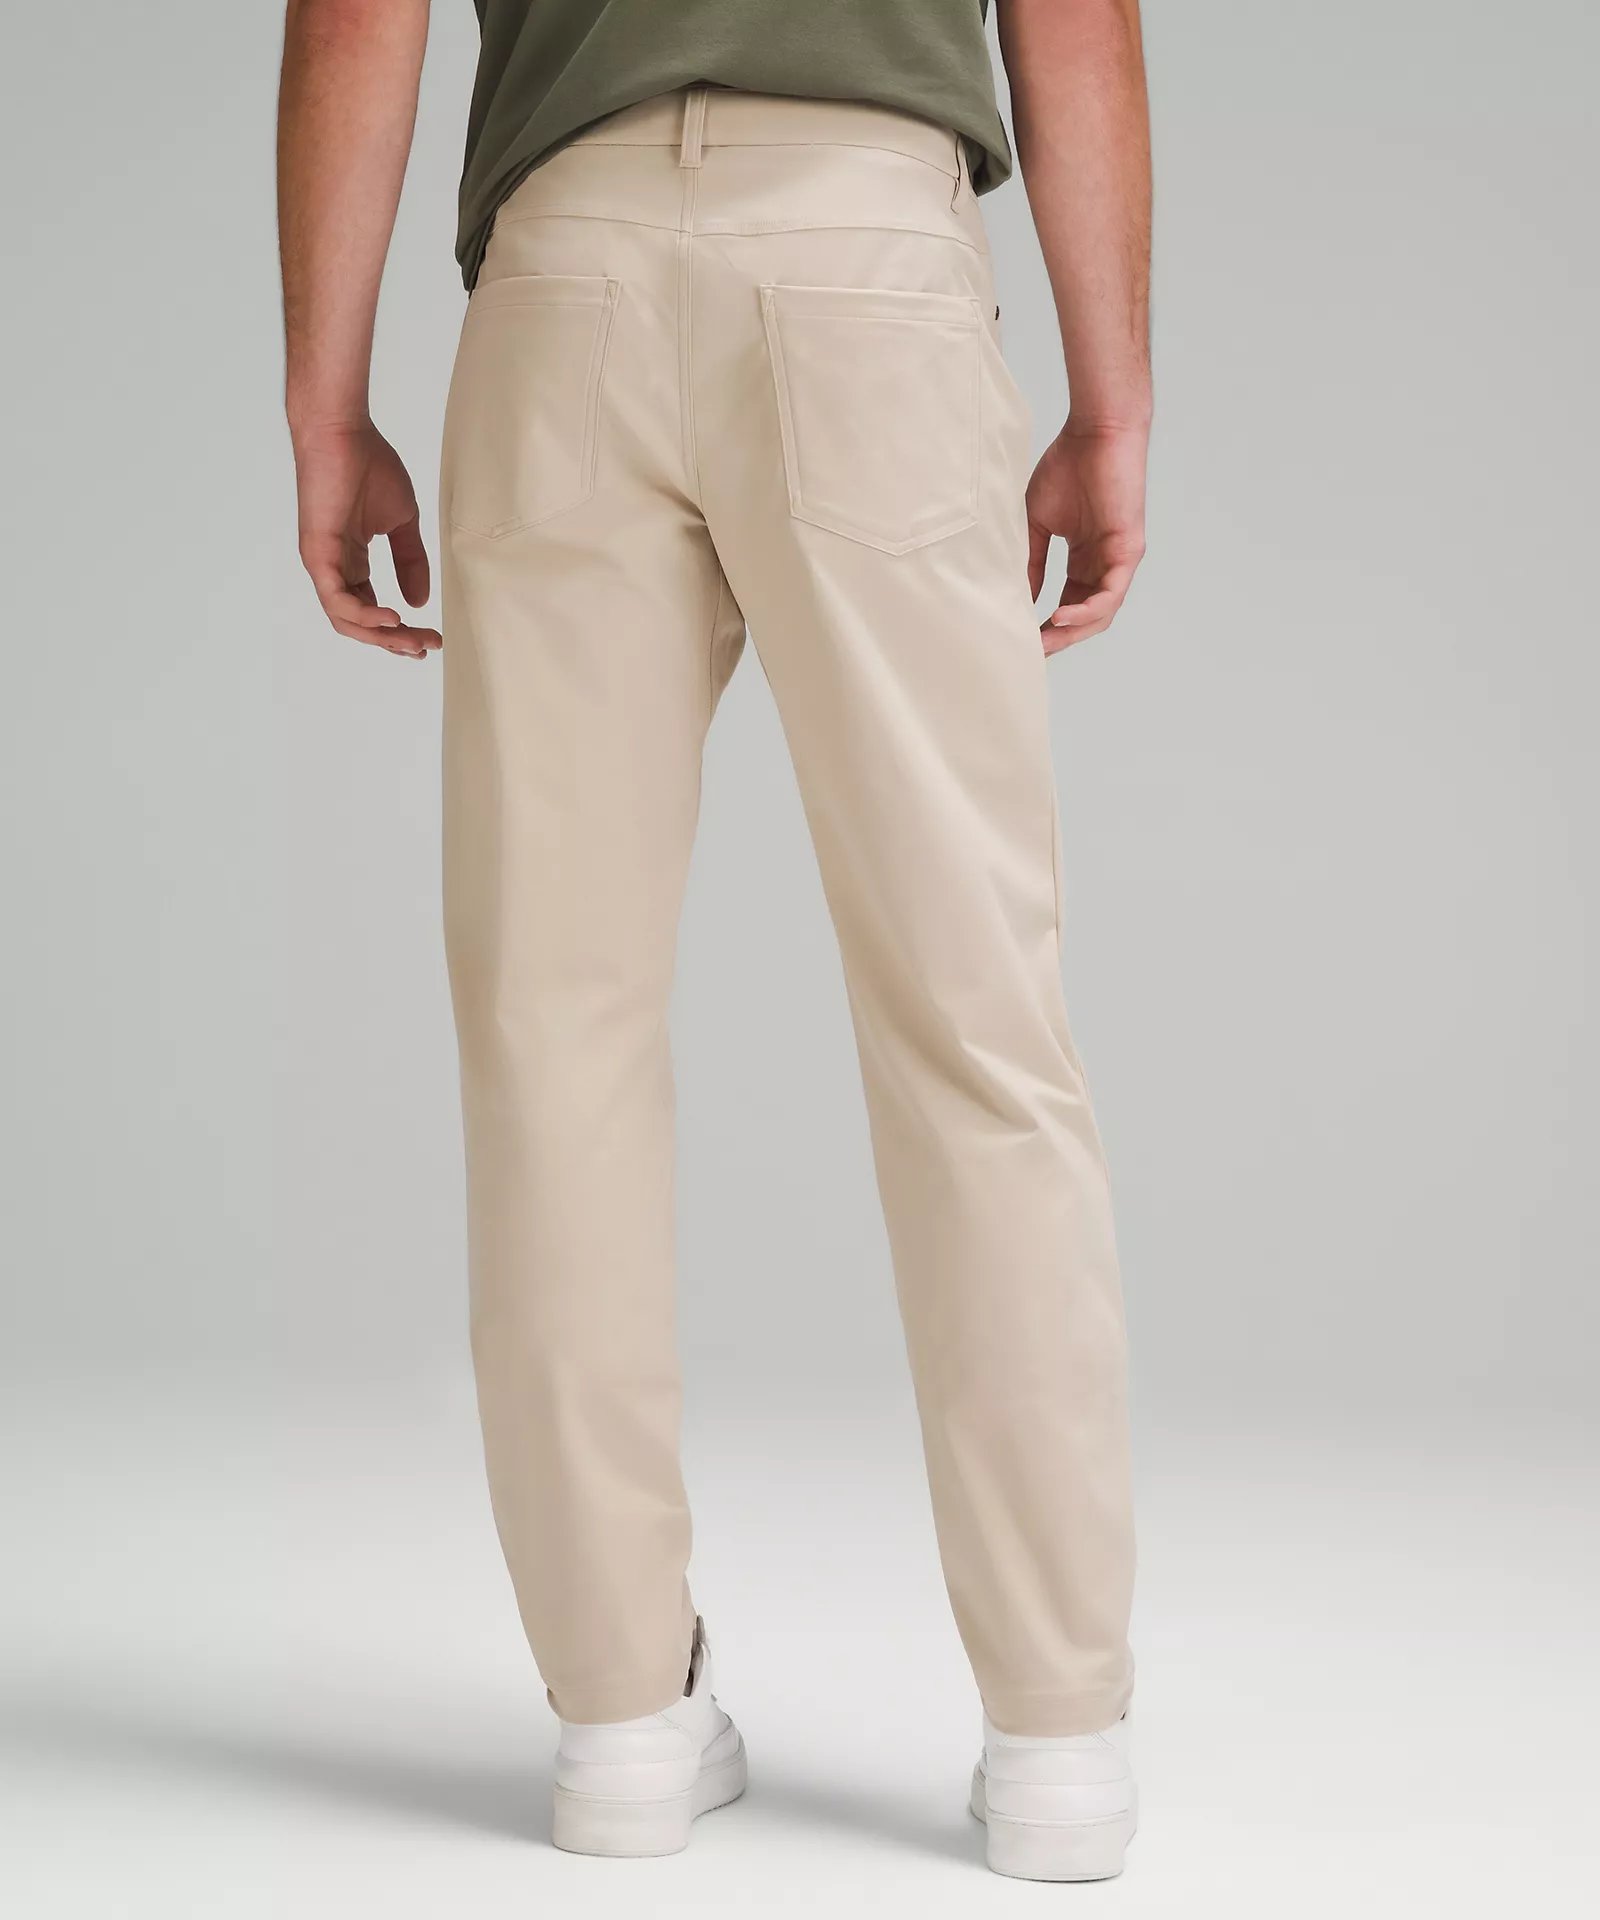 Lululemon ABC Pant Review - Are ABC Pants God's Gift To Men?